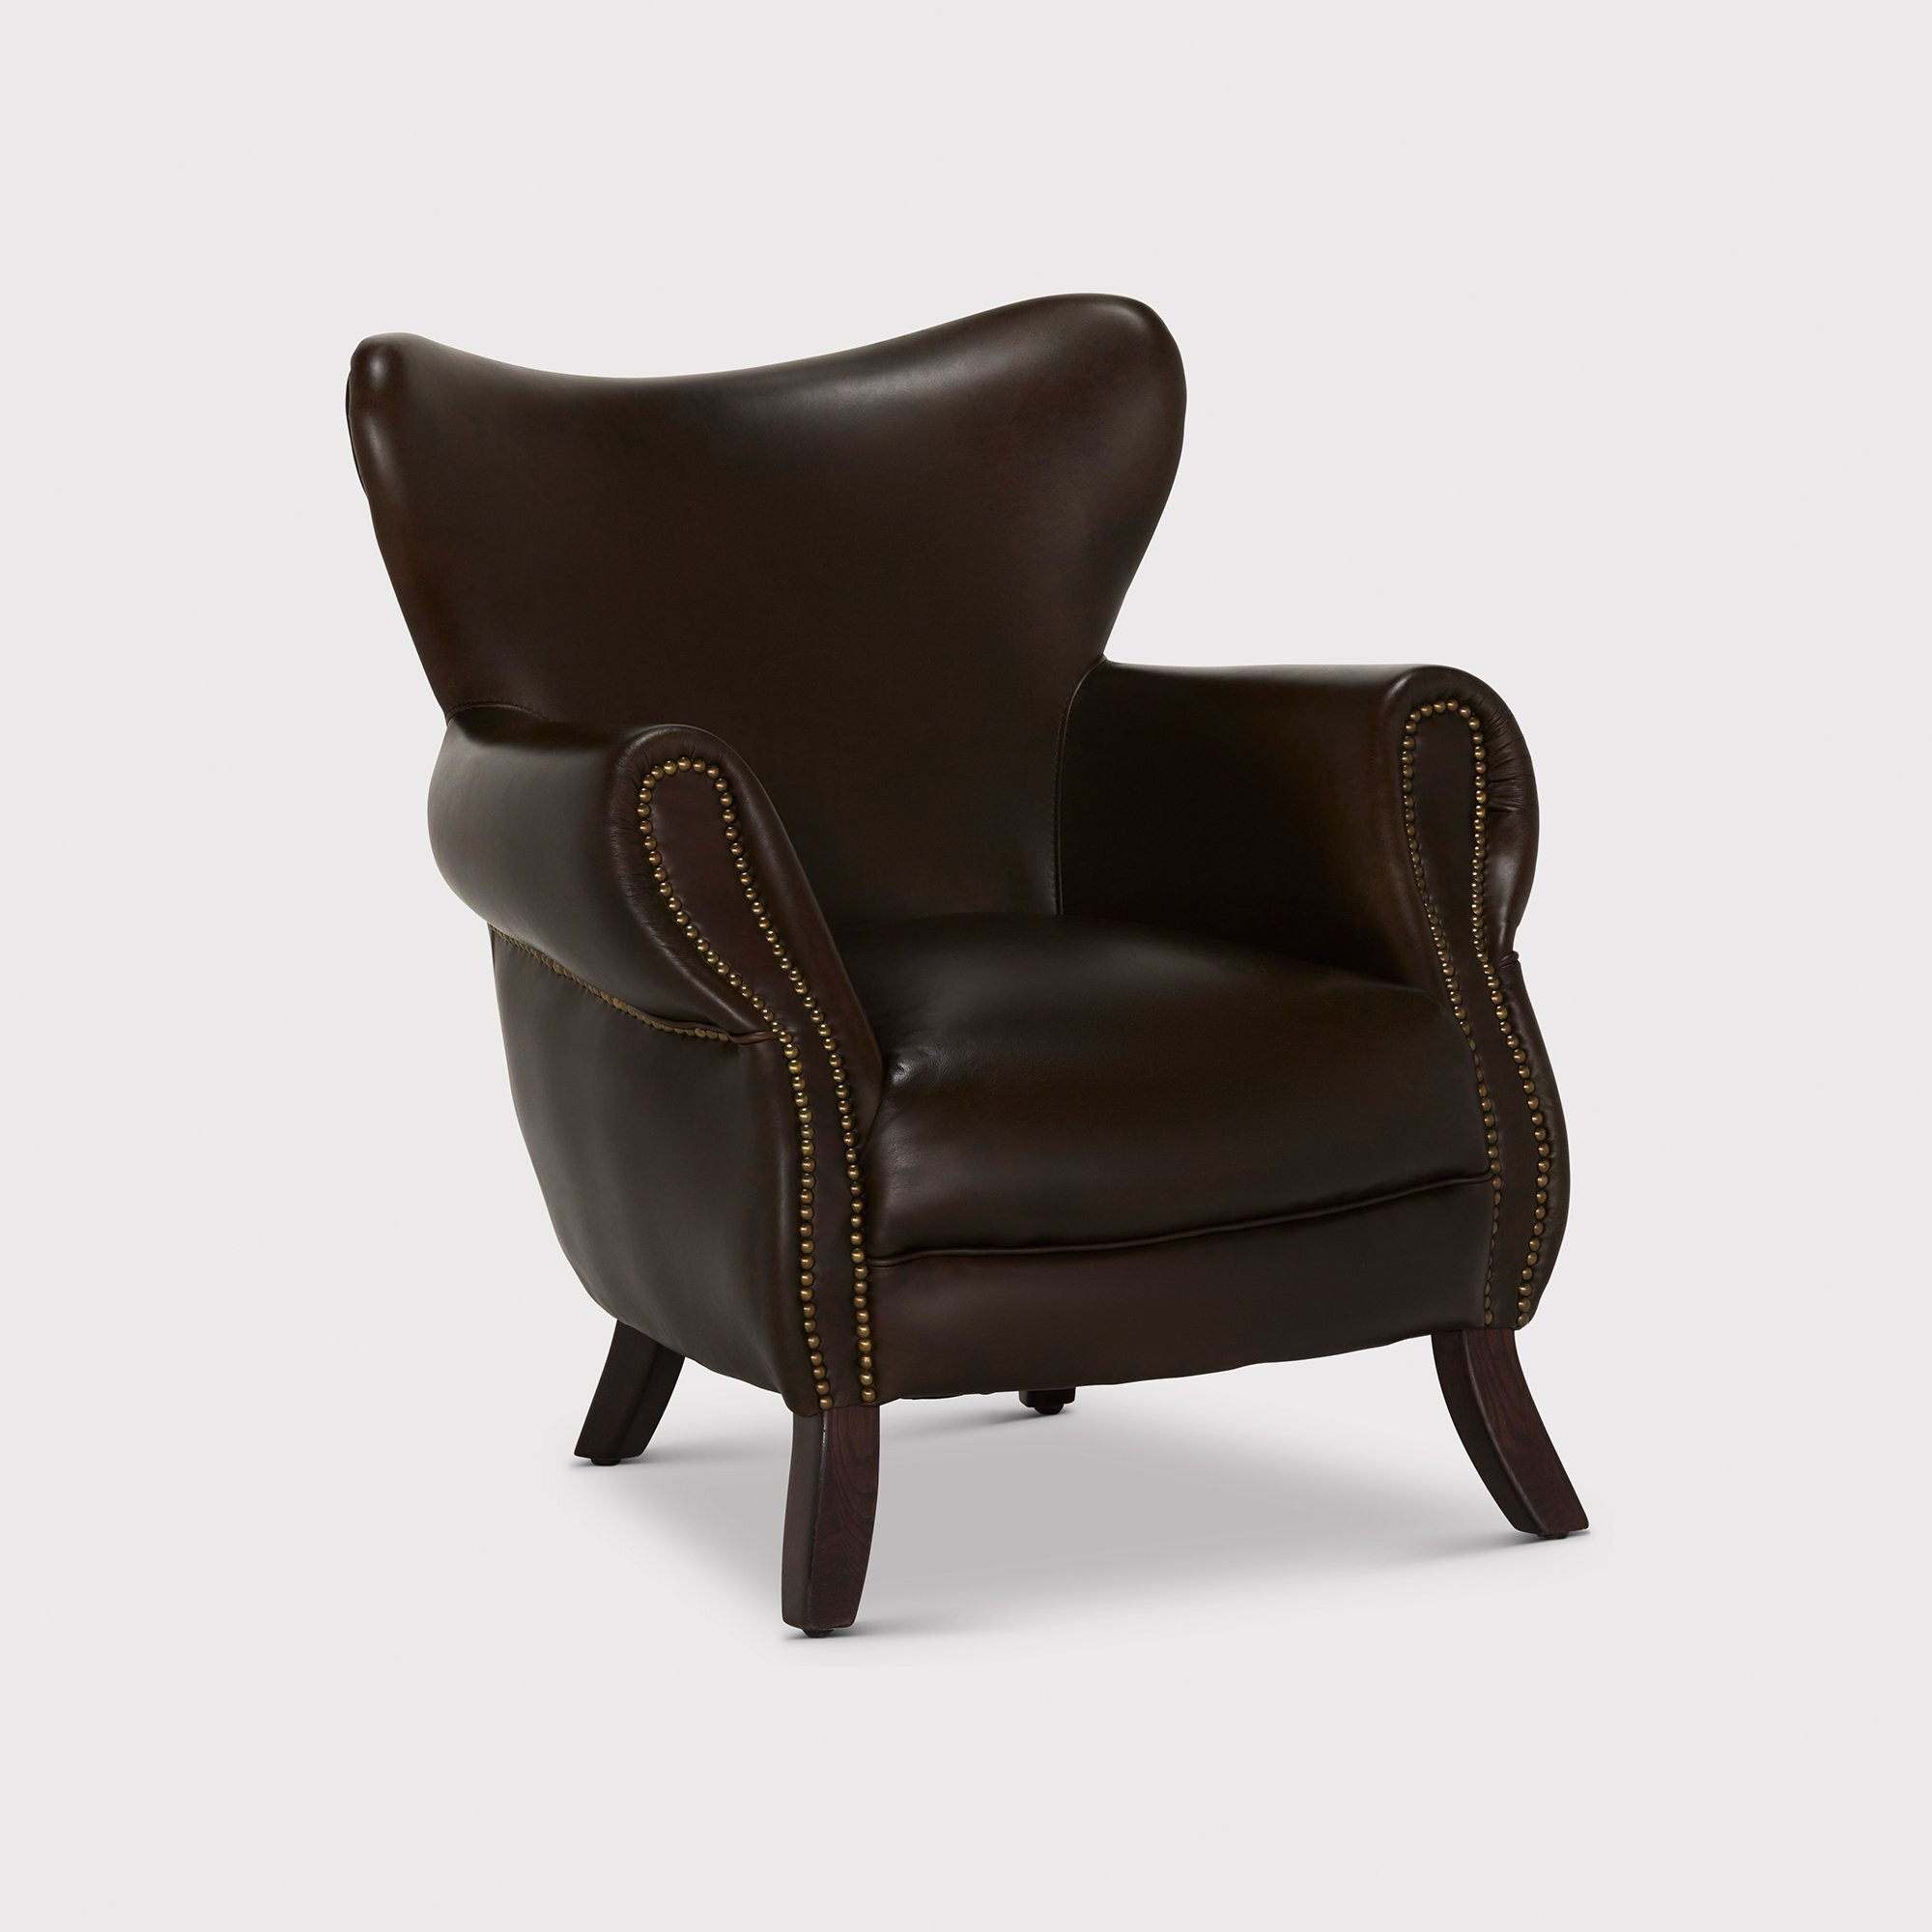 Timothy Oulton Scholar Armchair, Brown Leather - Barker & Stonehouse - image 1